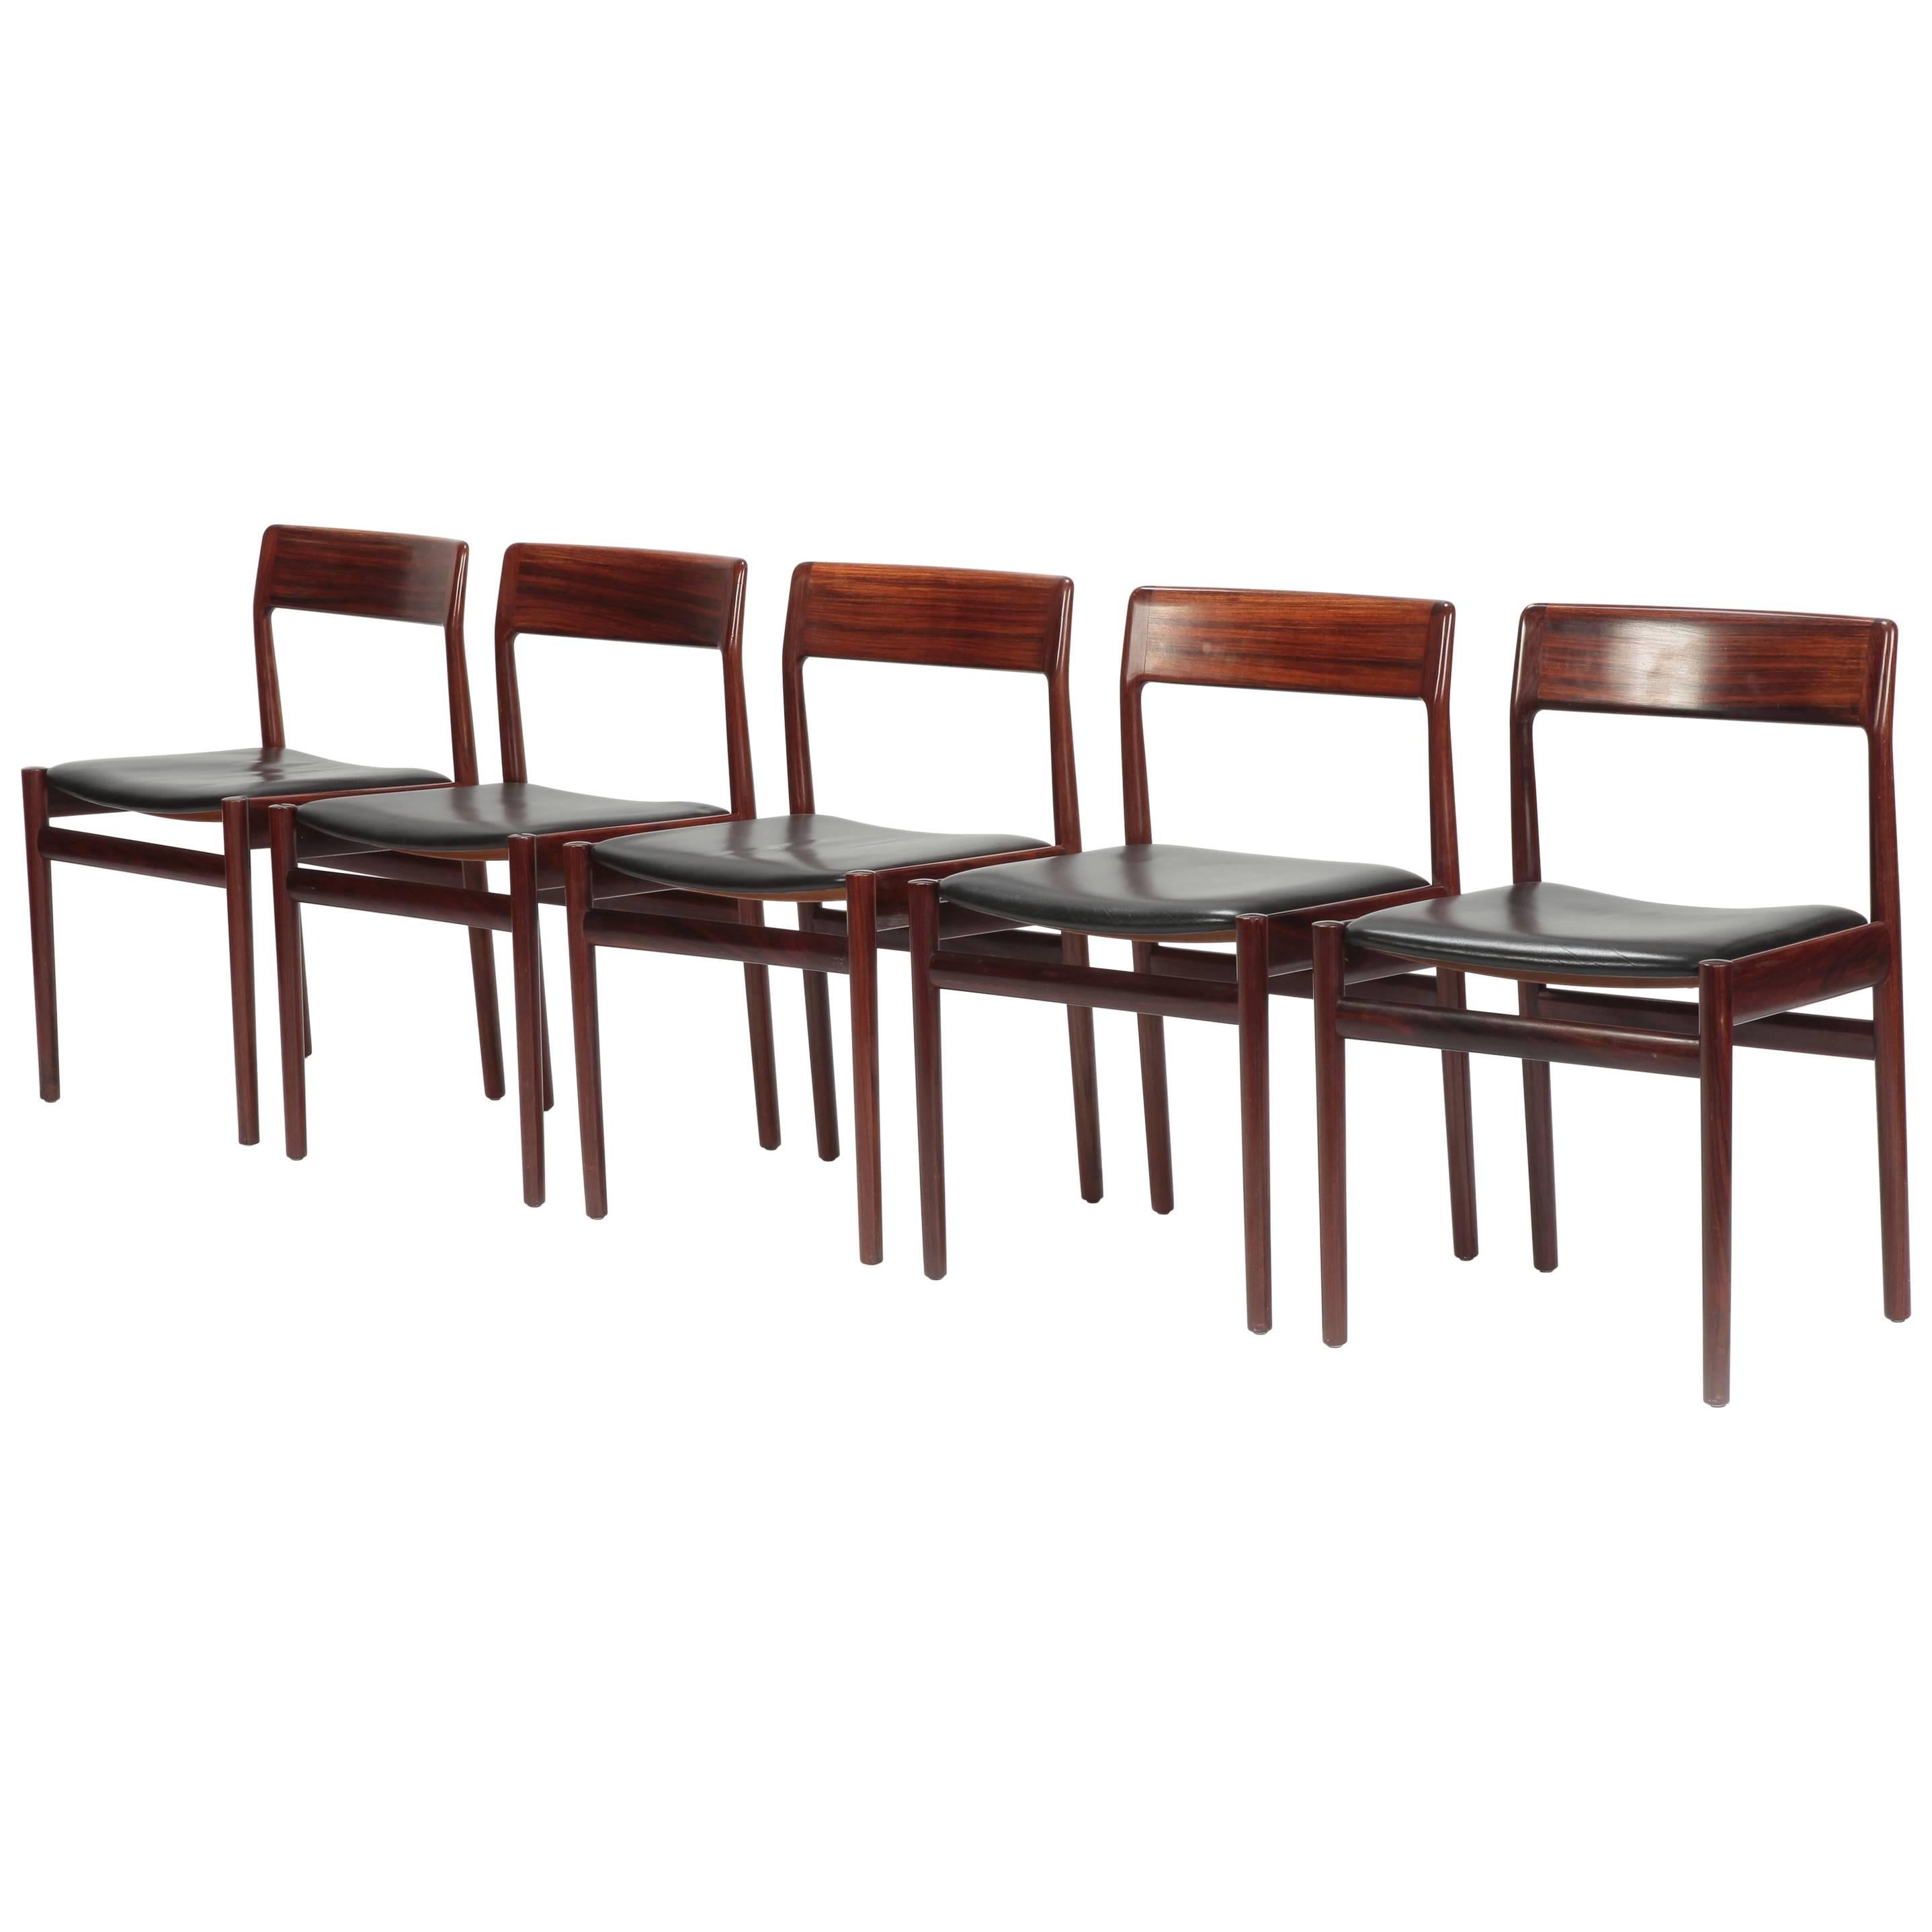 5 Johannes Norgaard Rosewood Chairs, 1960s